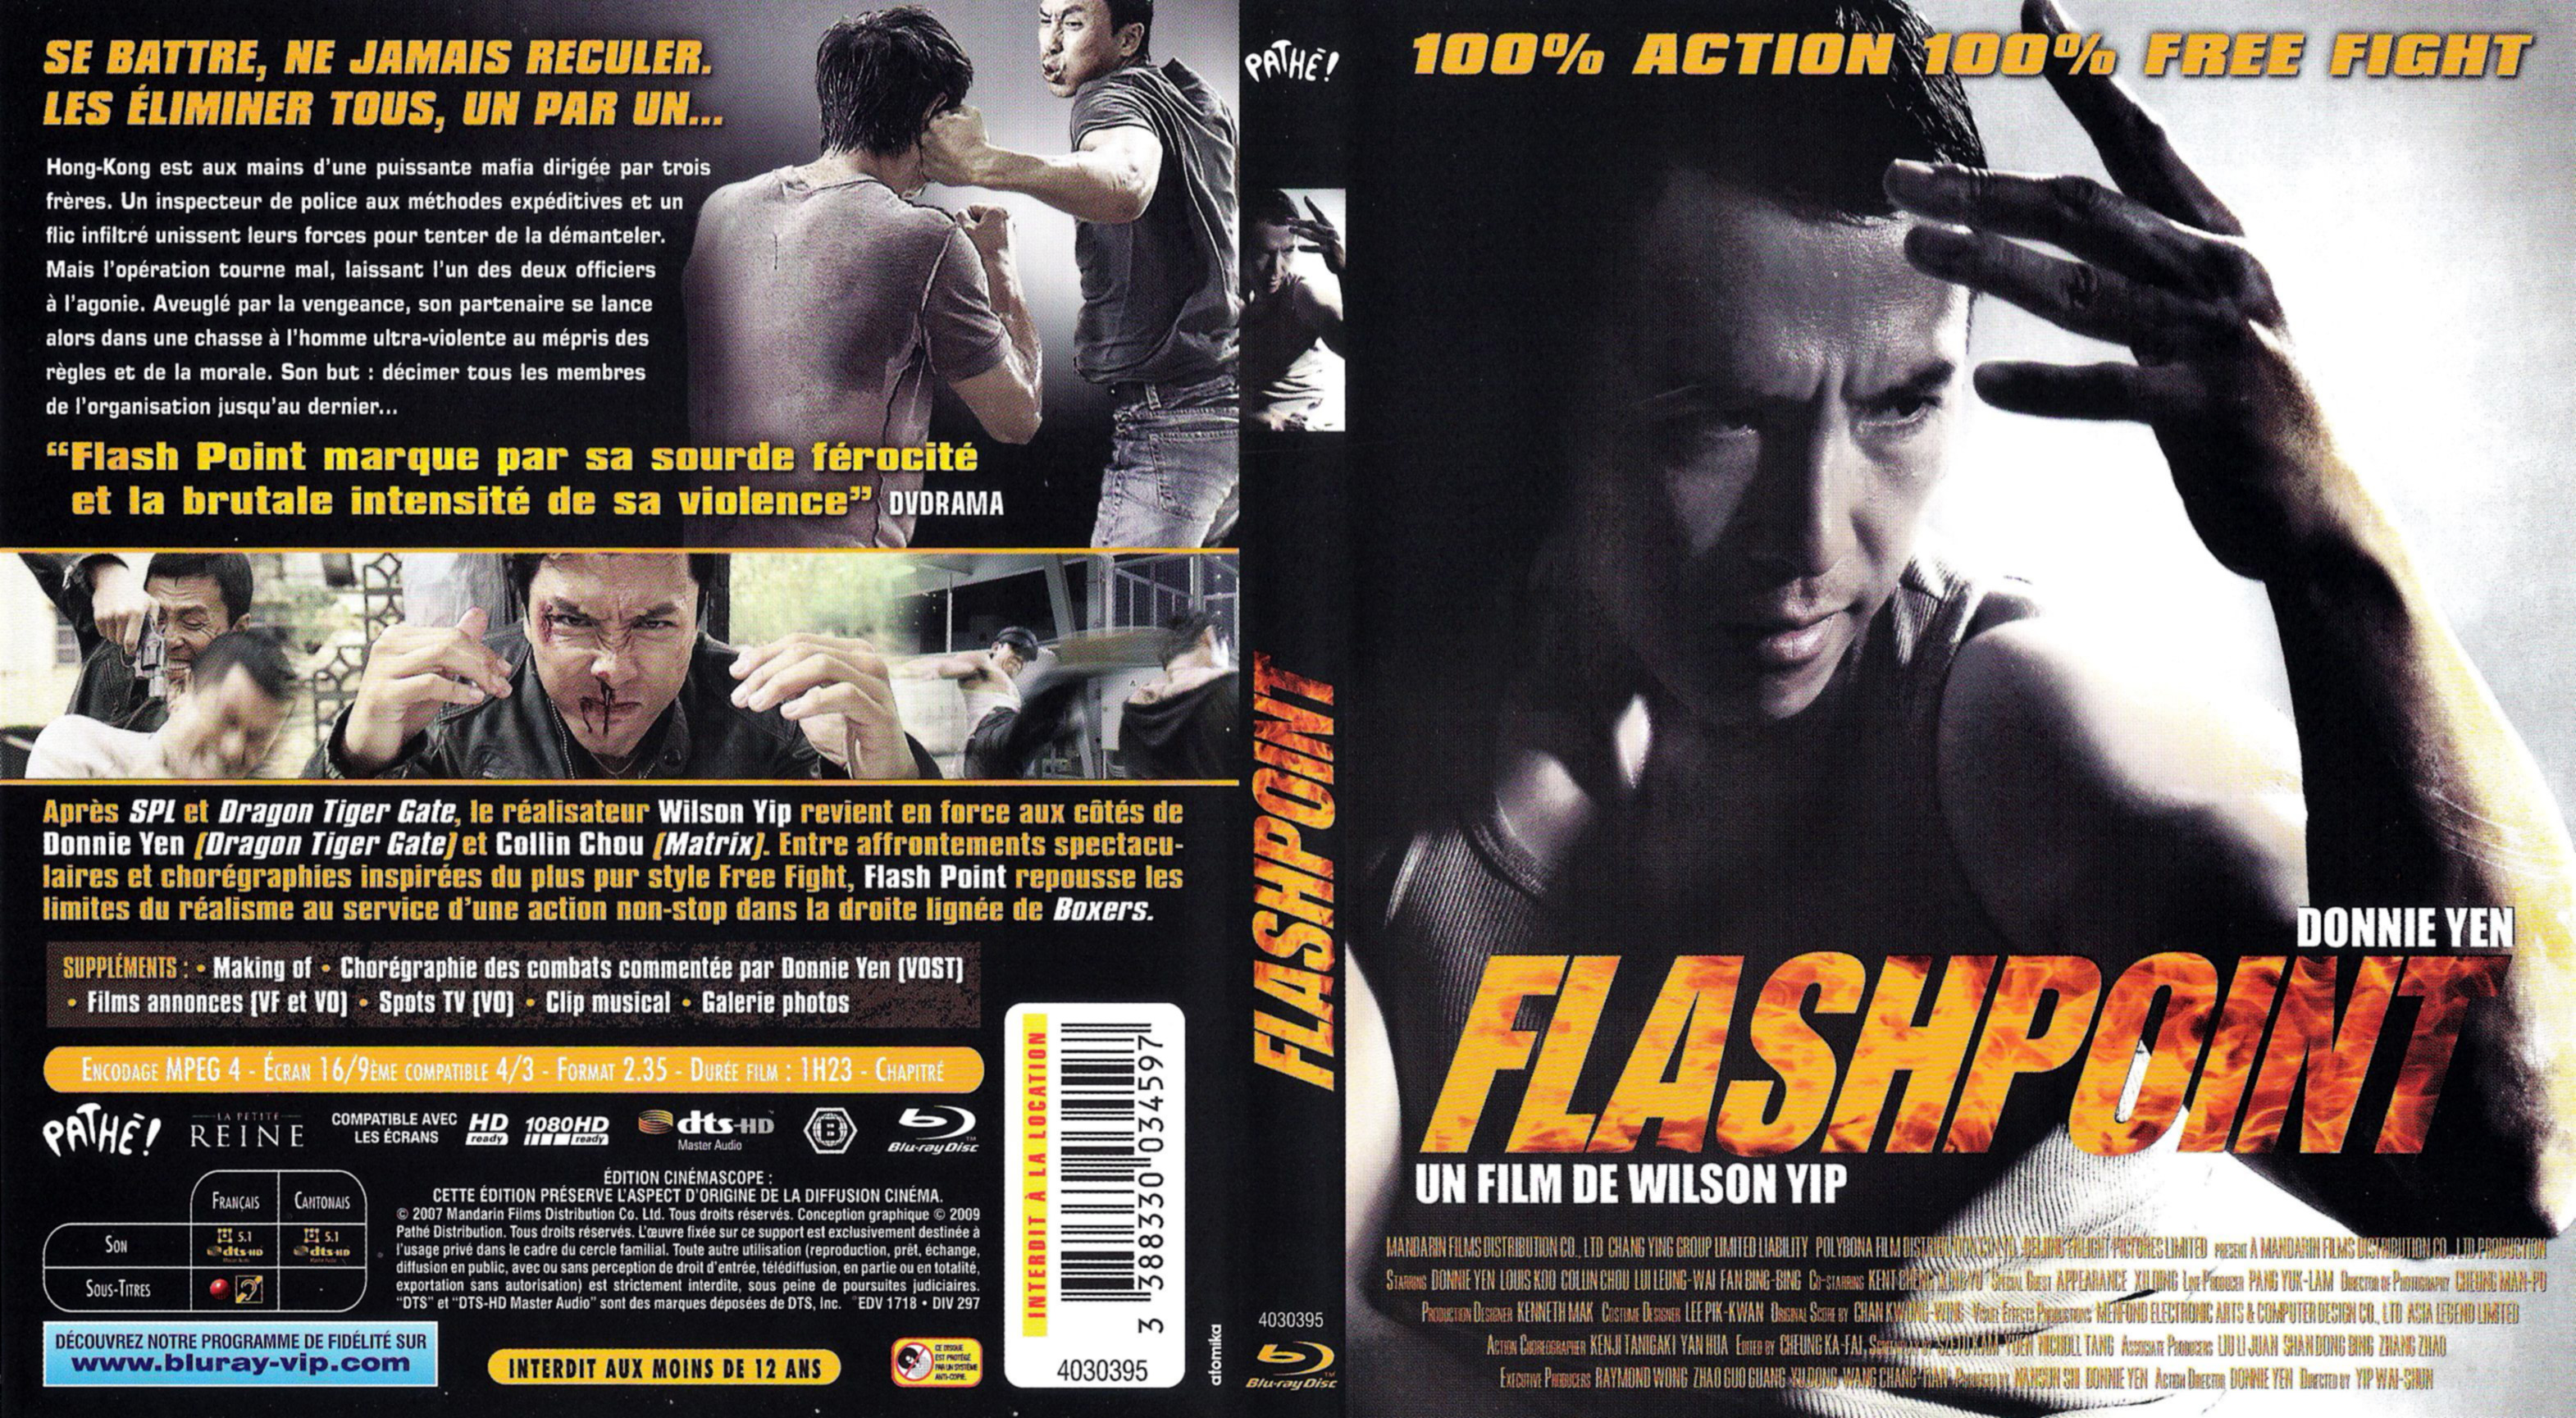 Jaquette DVD Flashpoint (BLU-RAY)